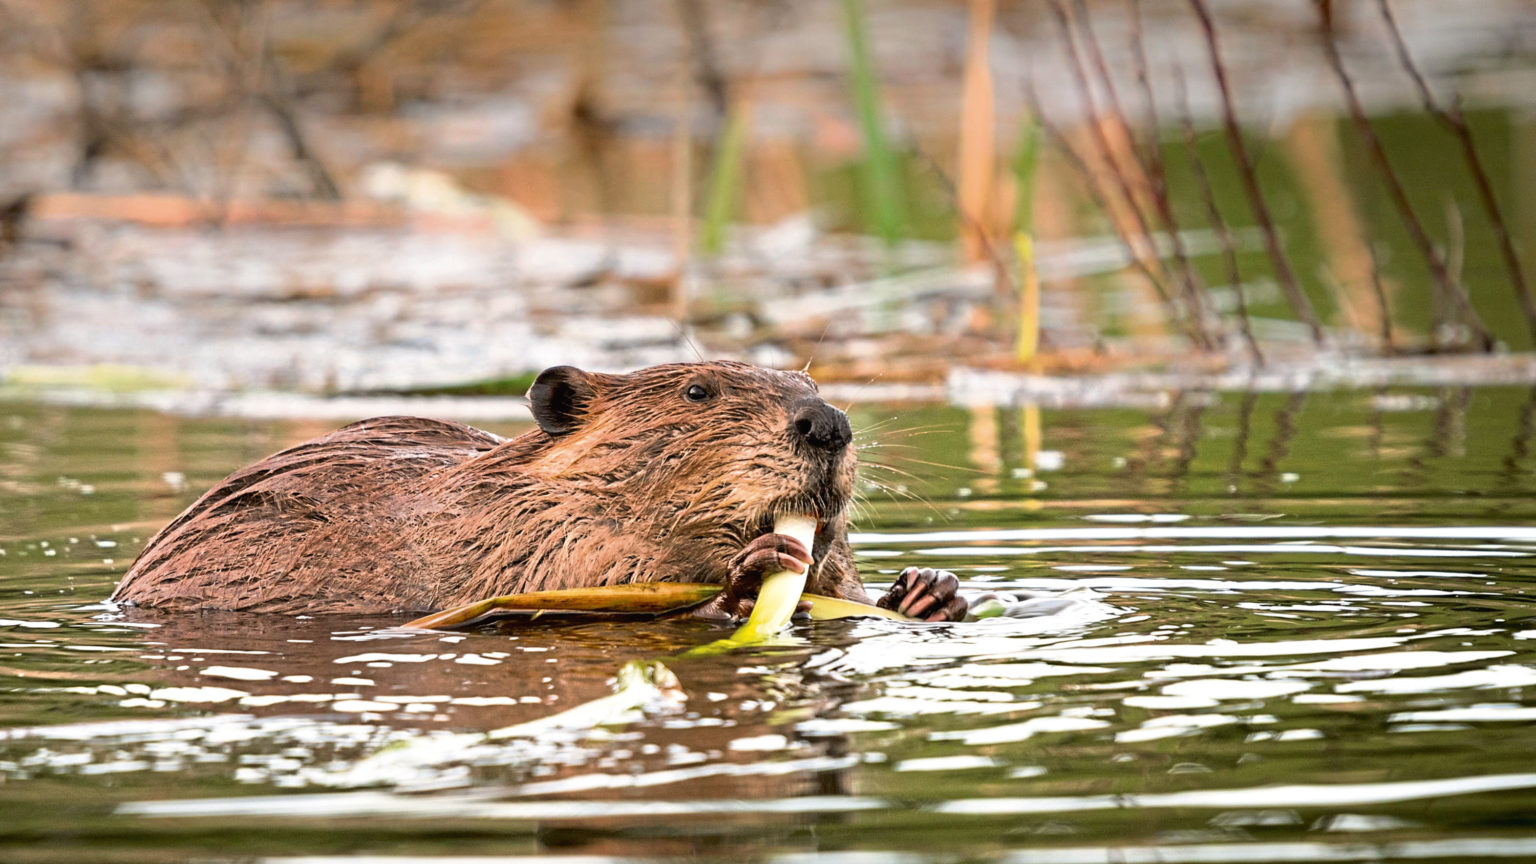 JIM CRUMLEY: Why I'm fighting the brutal slaughter of beavers